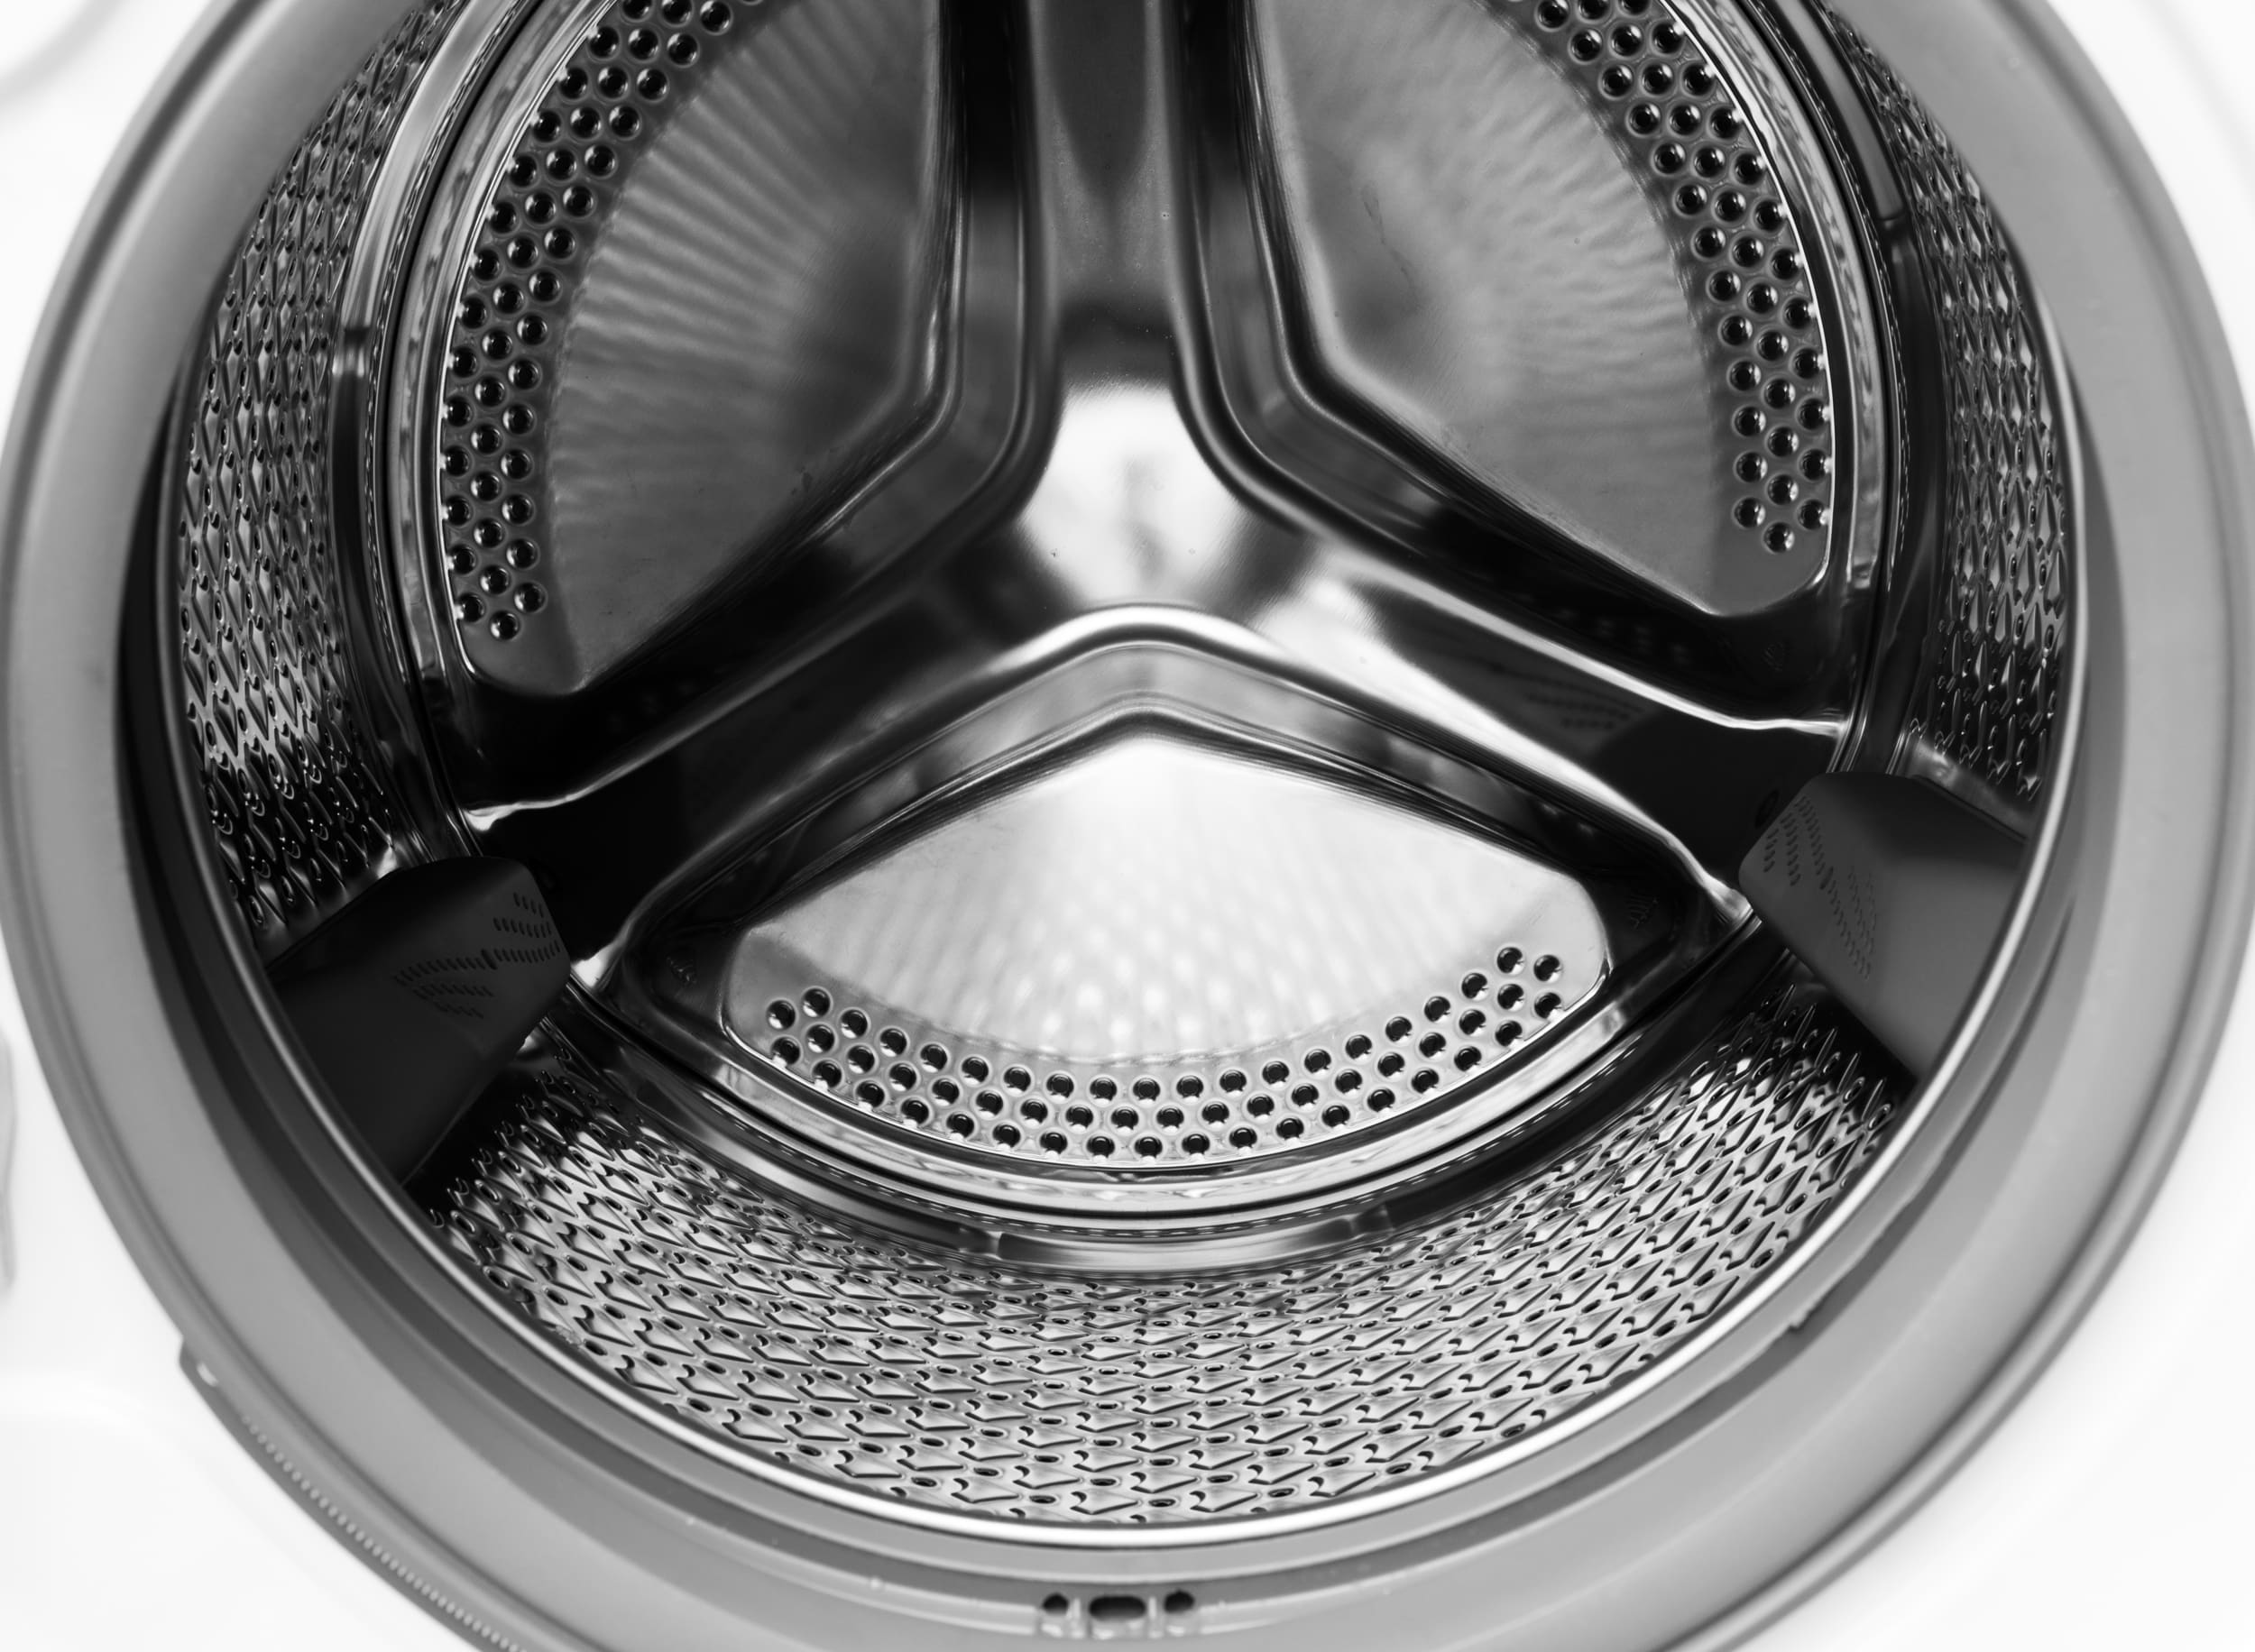 Blomberg WM 98400SX 24-Inch Compact Washing Machine Review - Reviewed ...